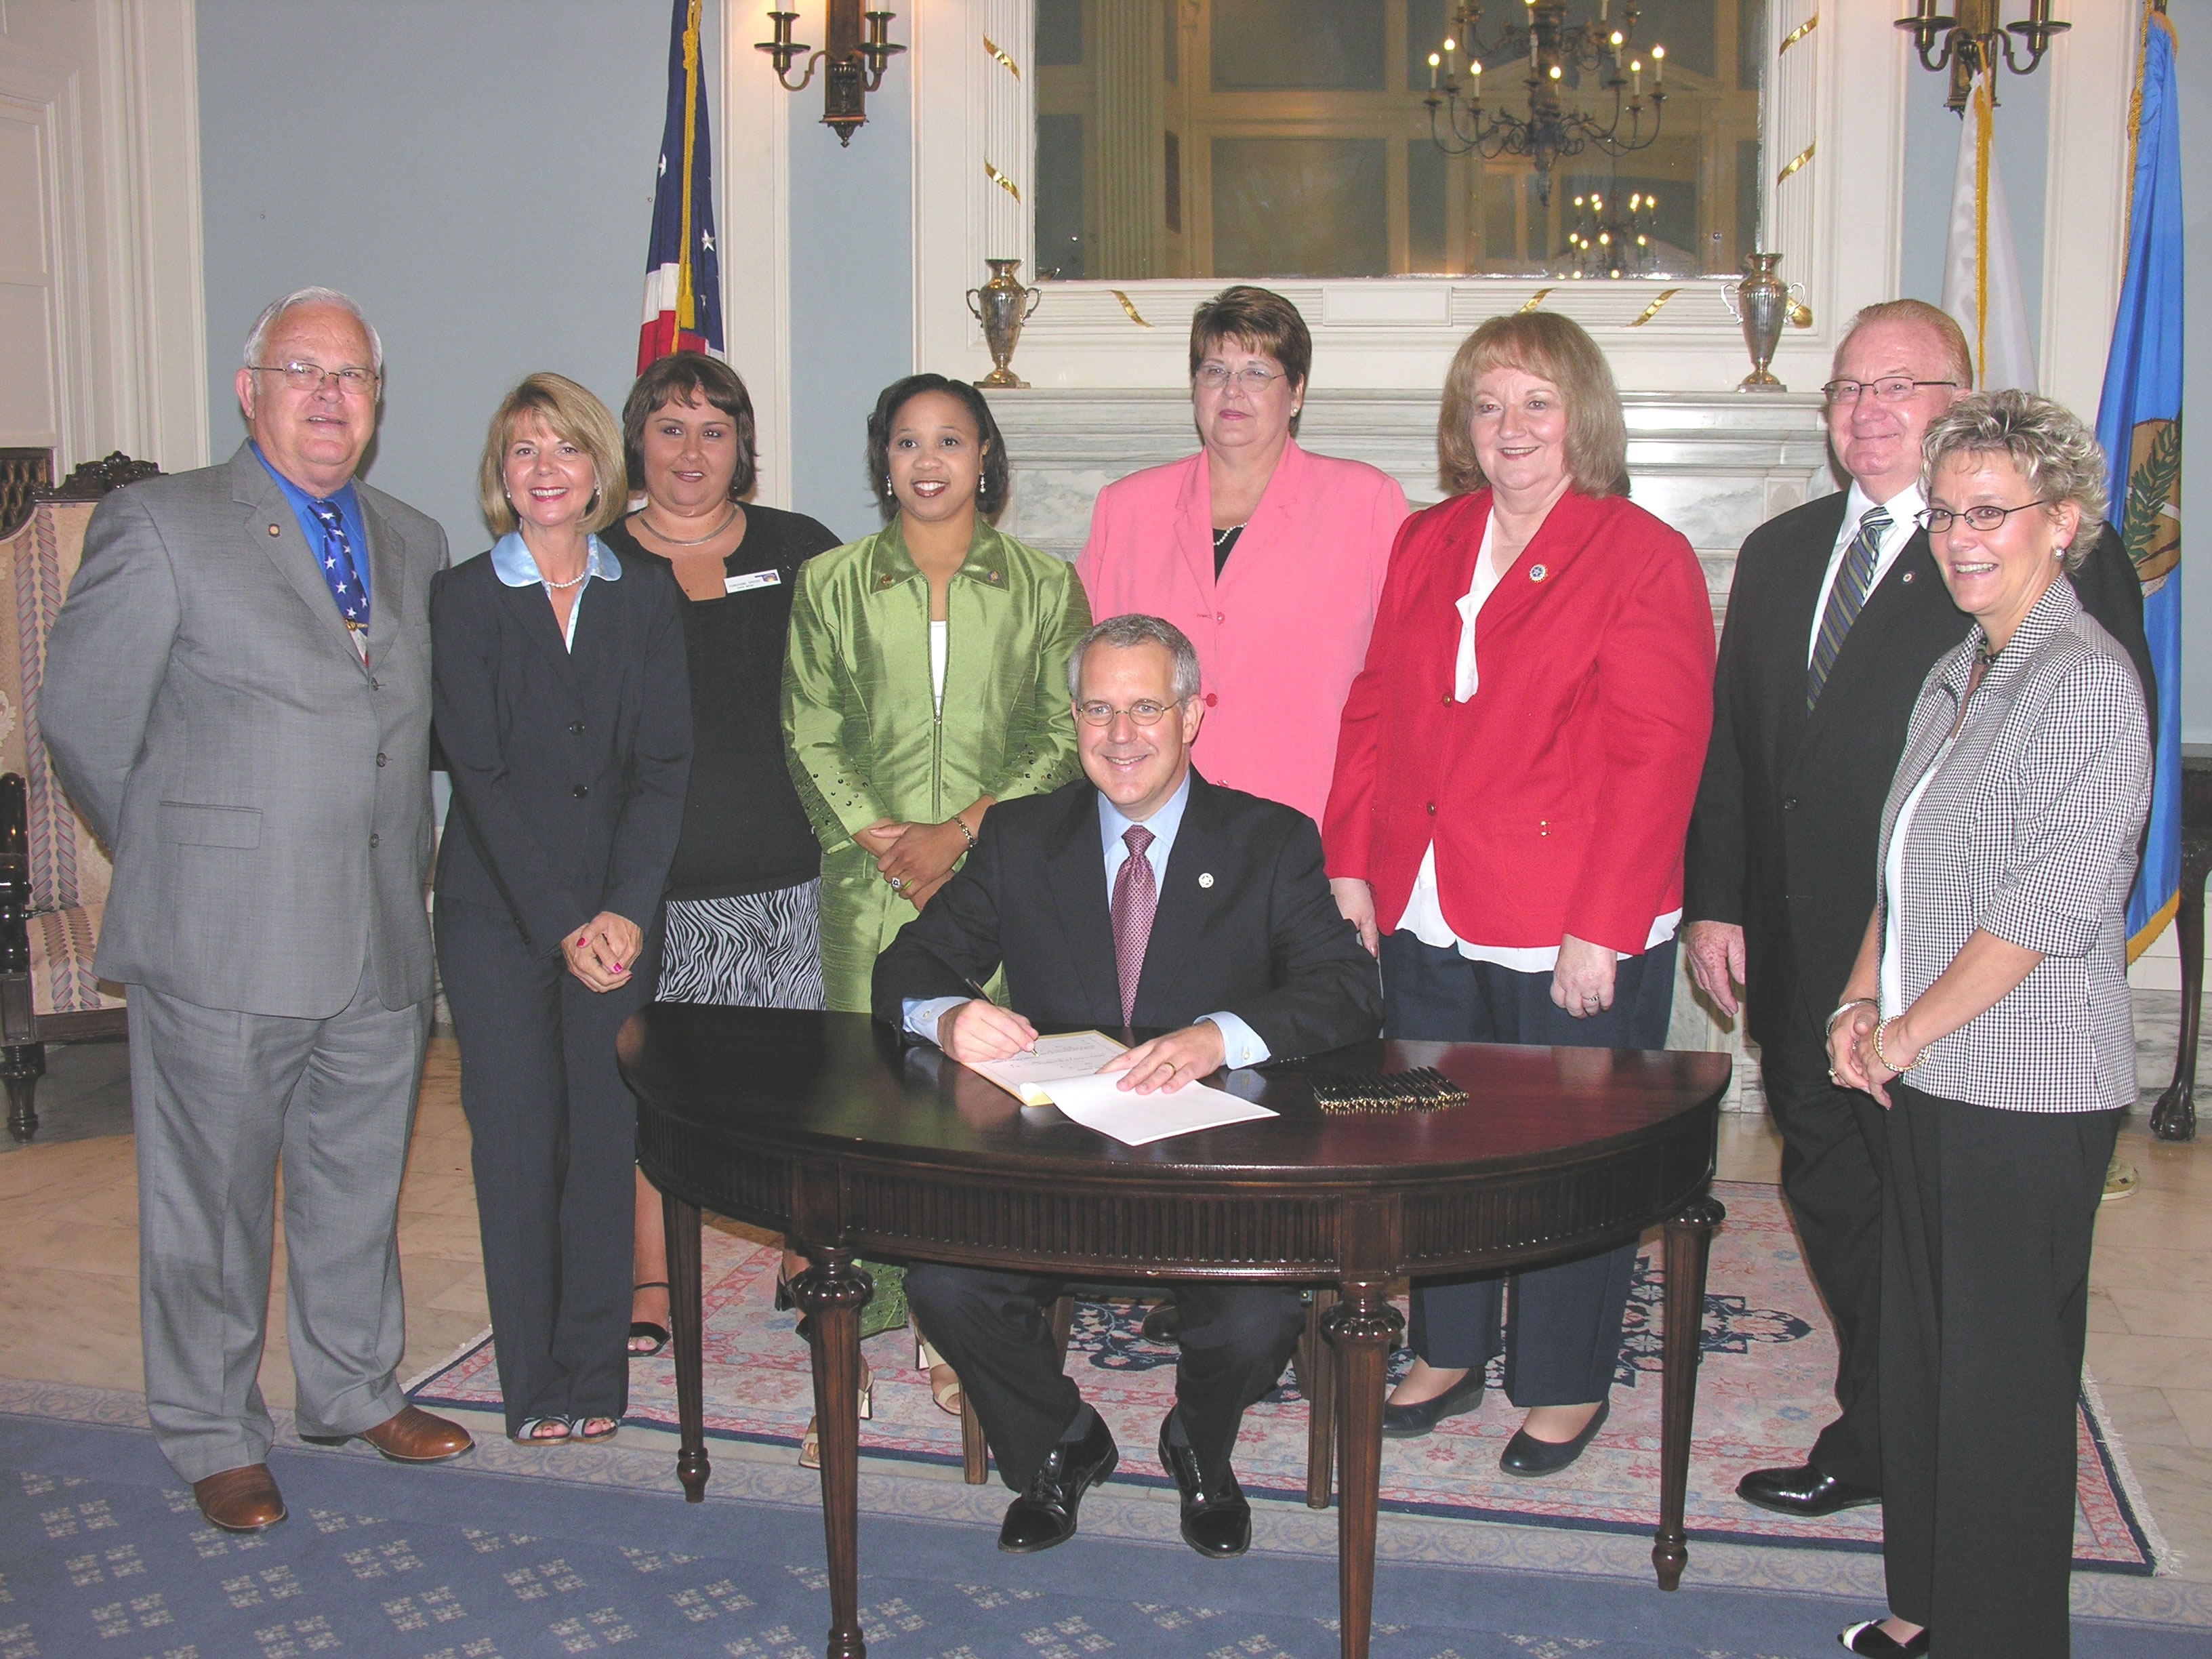 Ceremonial signing of Senate Bill 2163 in the Governor's Blue Room. 